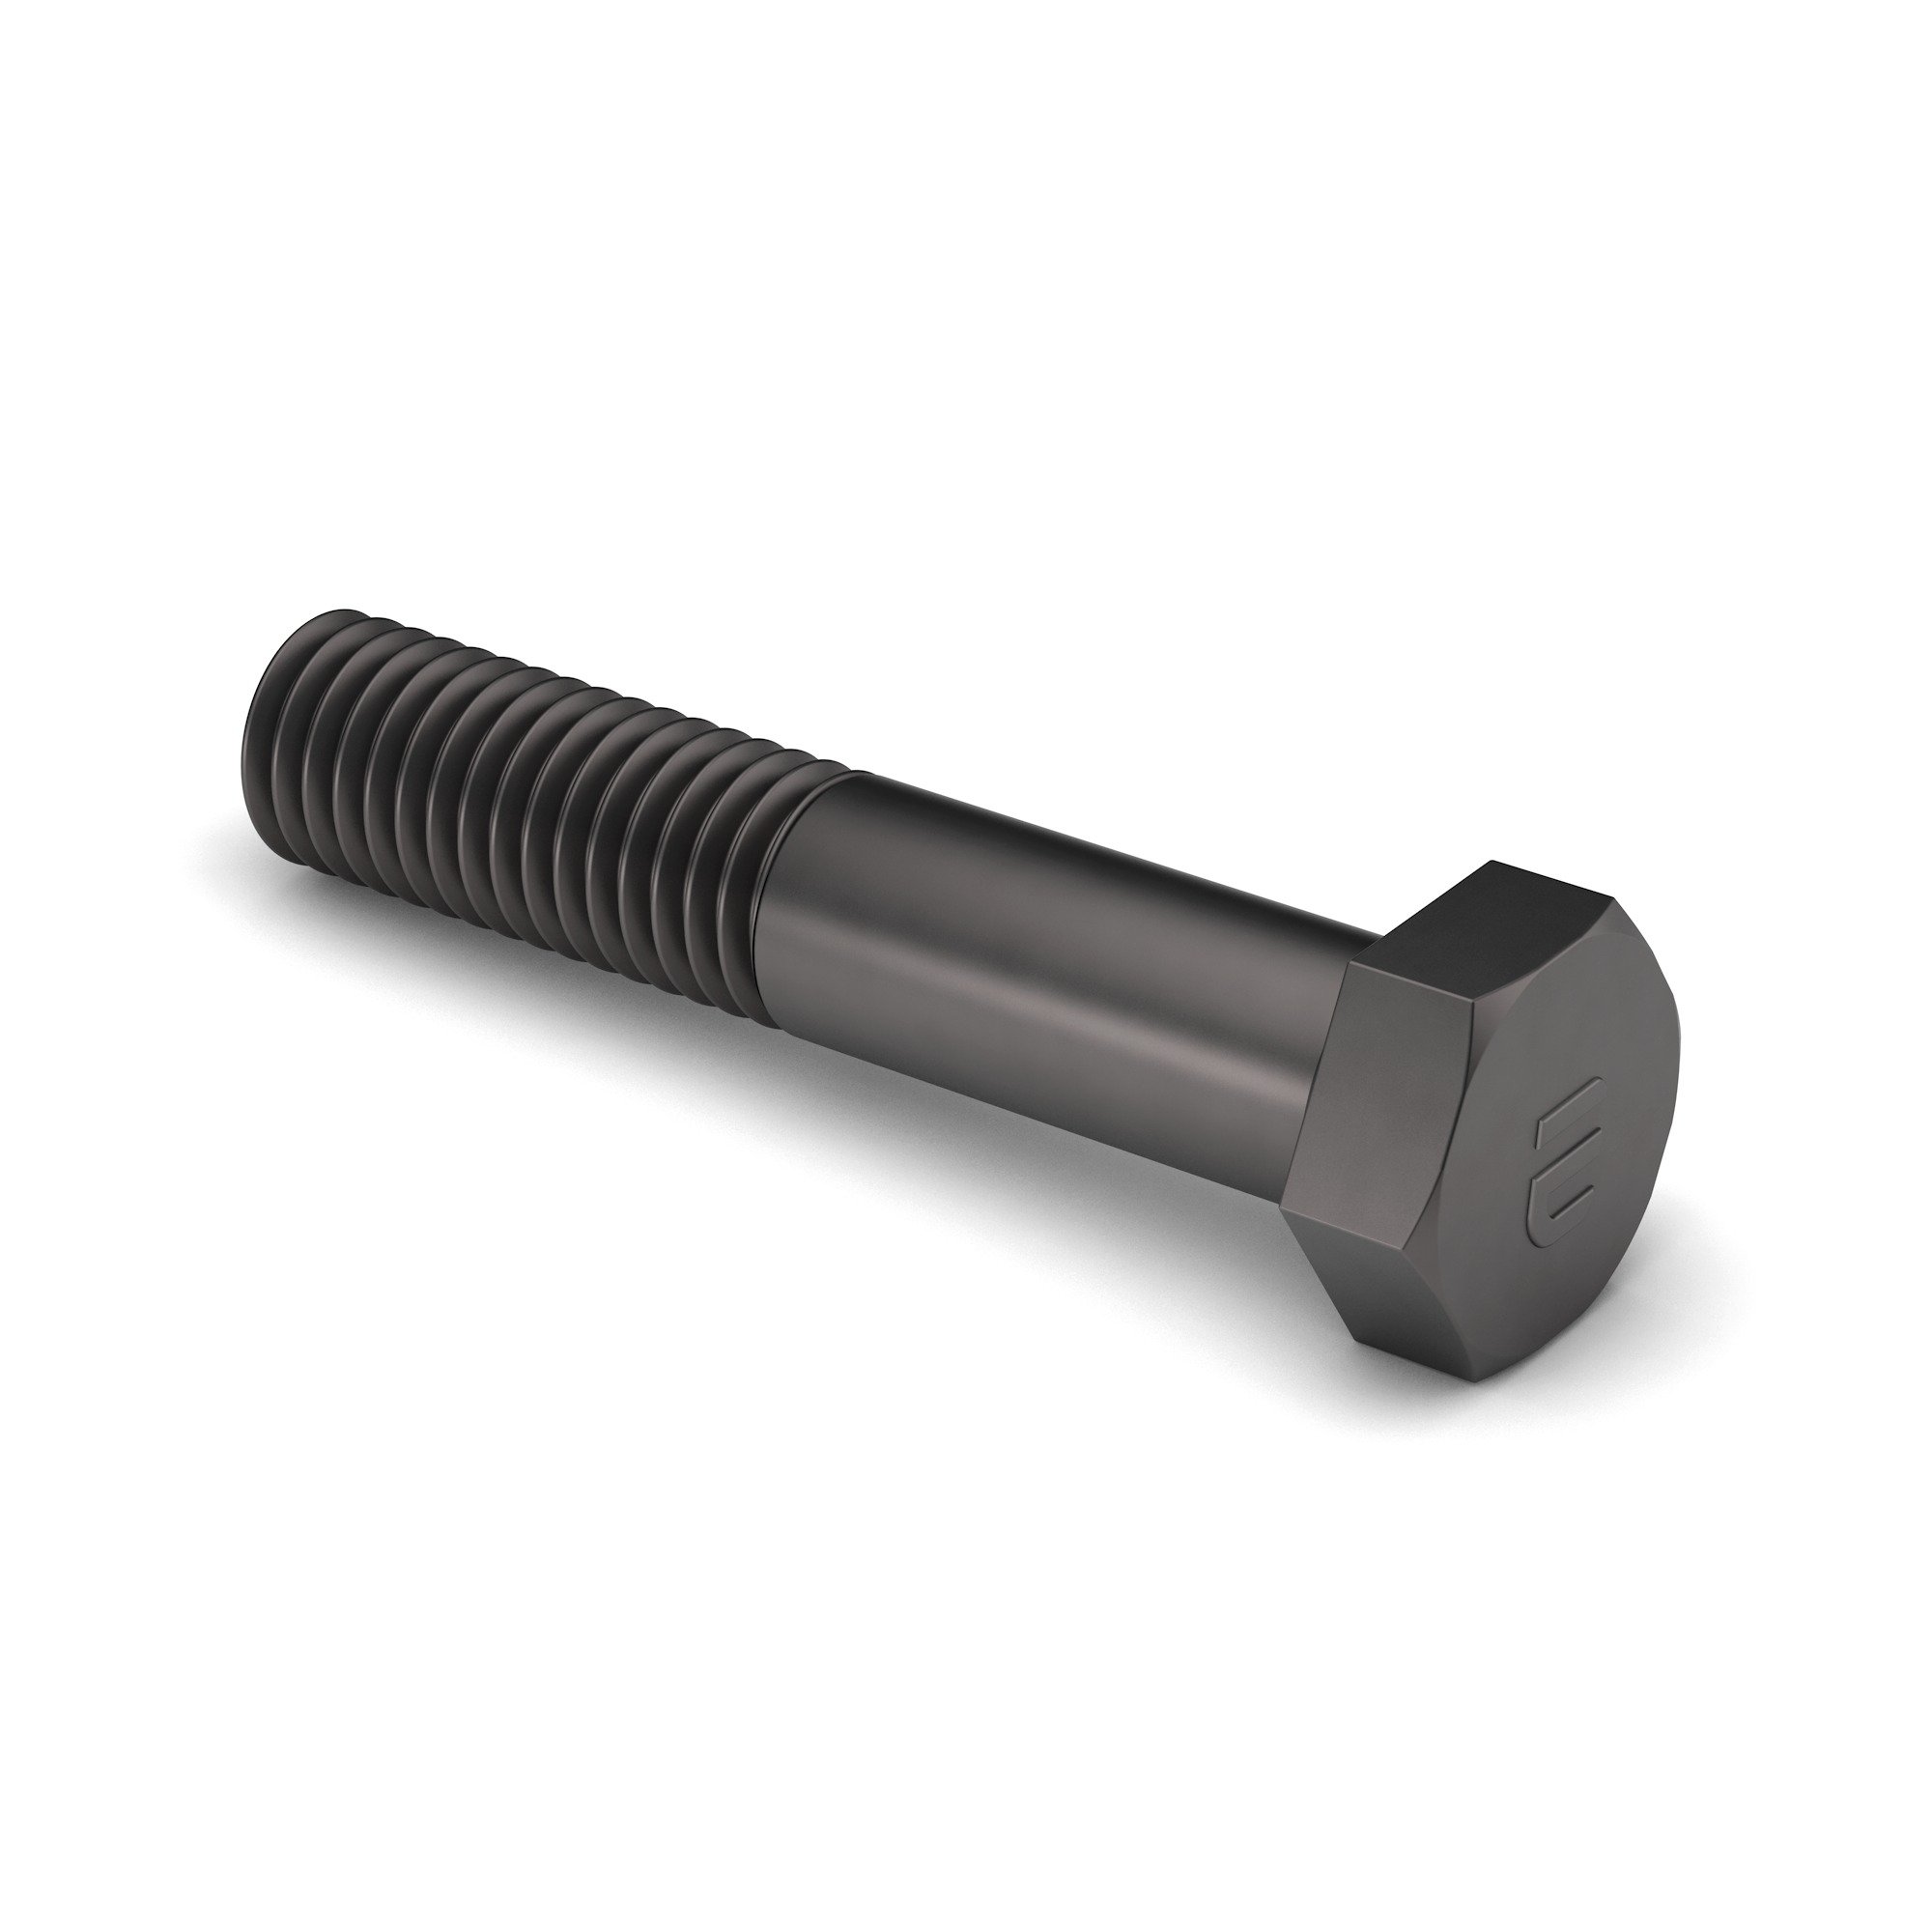 3/4-10x6 1/2 J429 GR 8 Hex Bolt / Cap Screw w/3 1/2 TL PER DRG #511411M3 REV.8 W/ Agco Deviation (Head Thickness) Zinc Plate & De-embrittle IAW/ ISO 4042 ZN8/CN/TO (No Sealant)